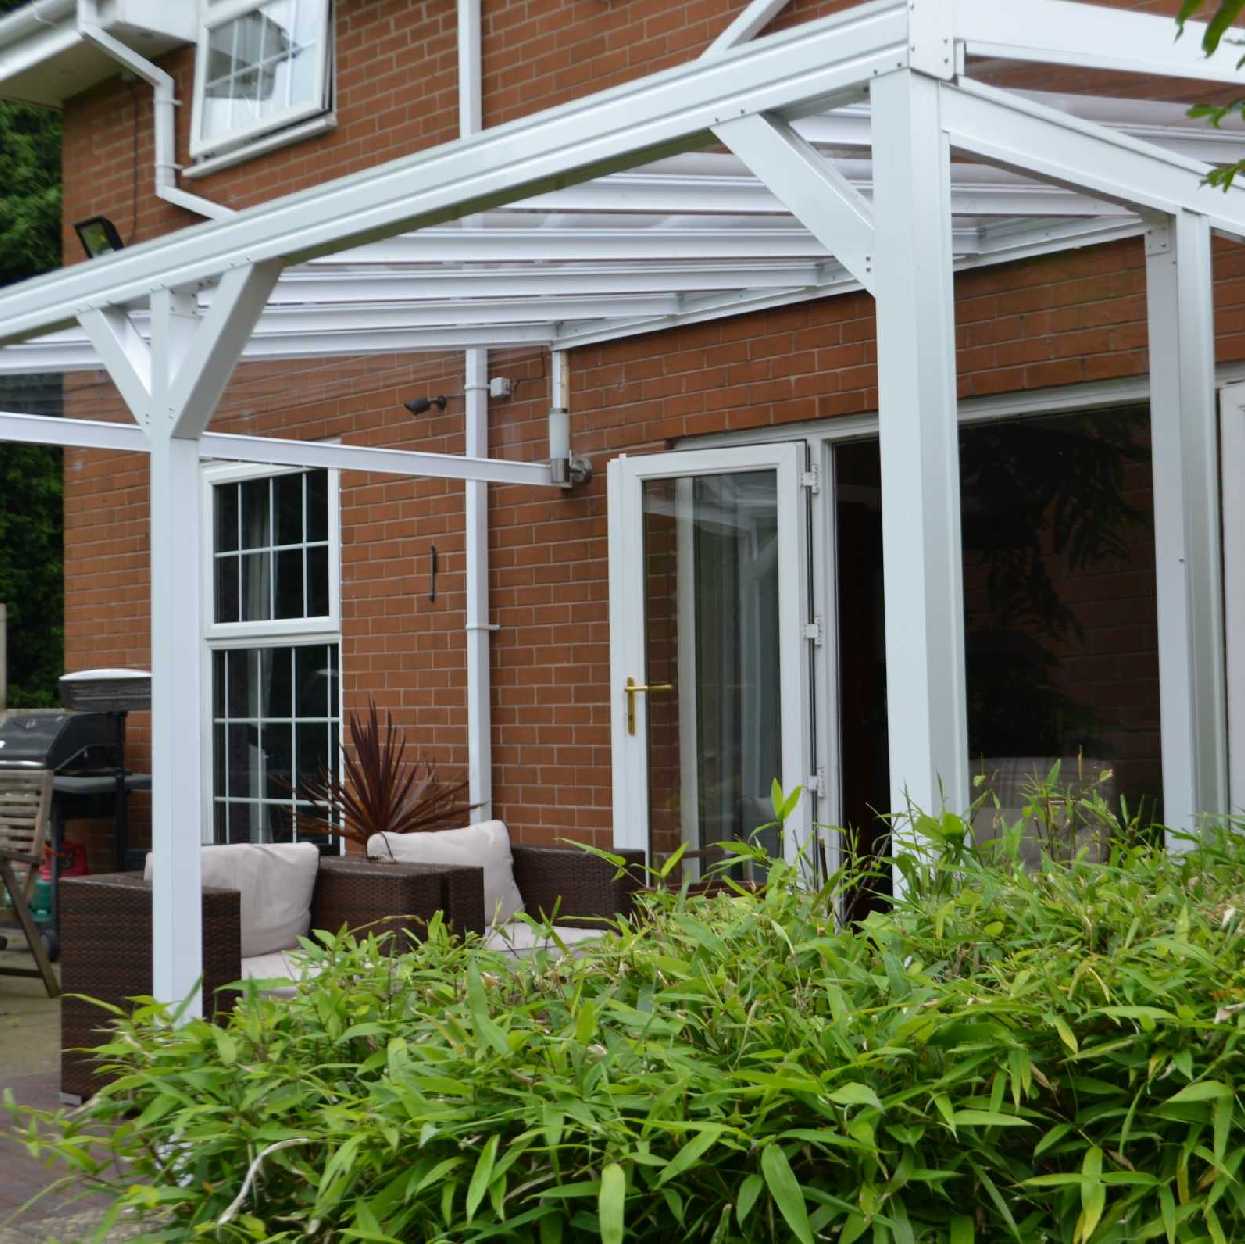 Omega Smart Lean-To Canopy, White with 6mm Glass Clear Plate Polycarbonate Glazing - 7.0m (W) x 2.0m (P), (4) Supporting Posts from Omega Build